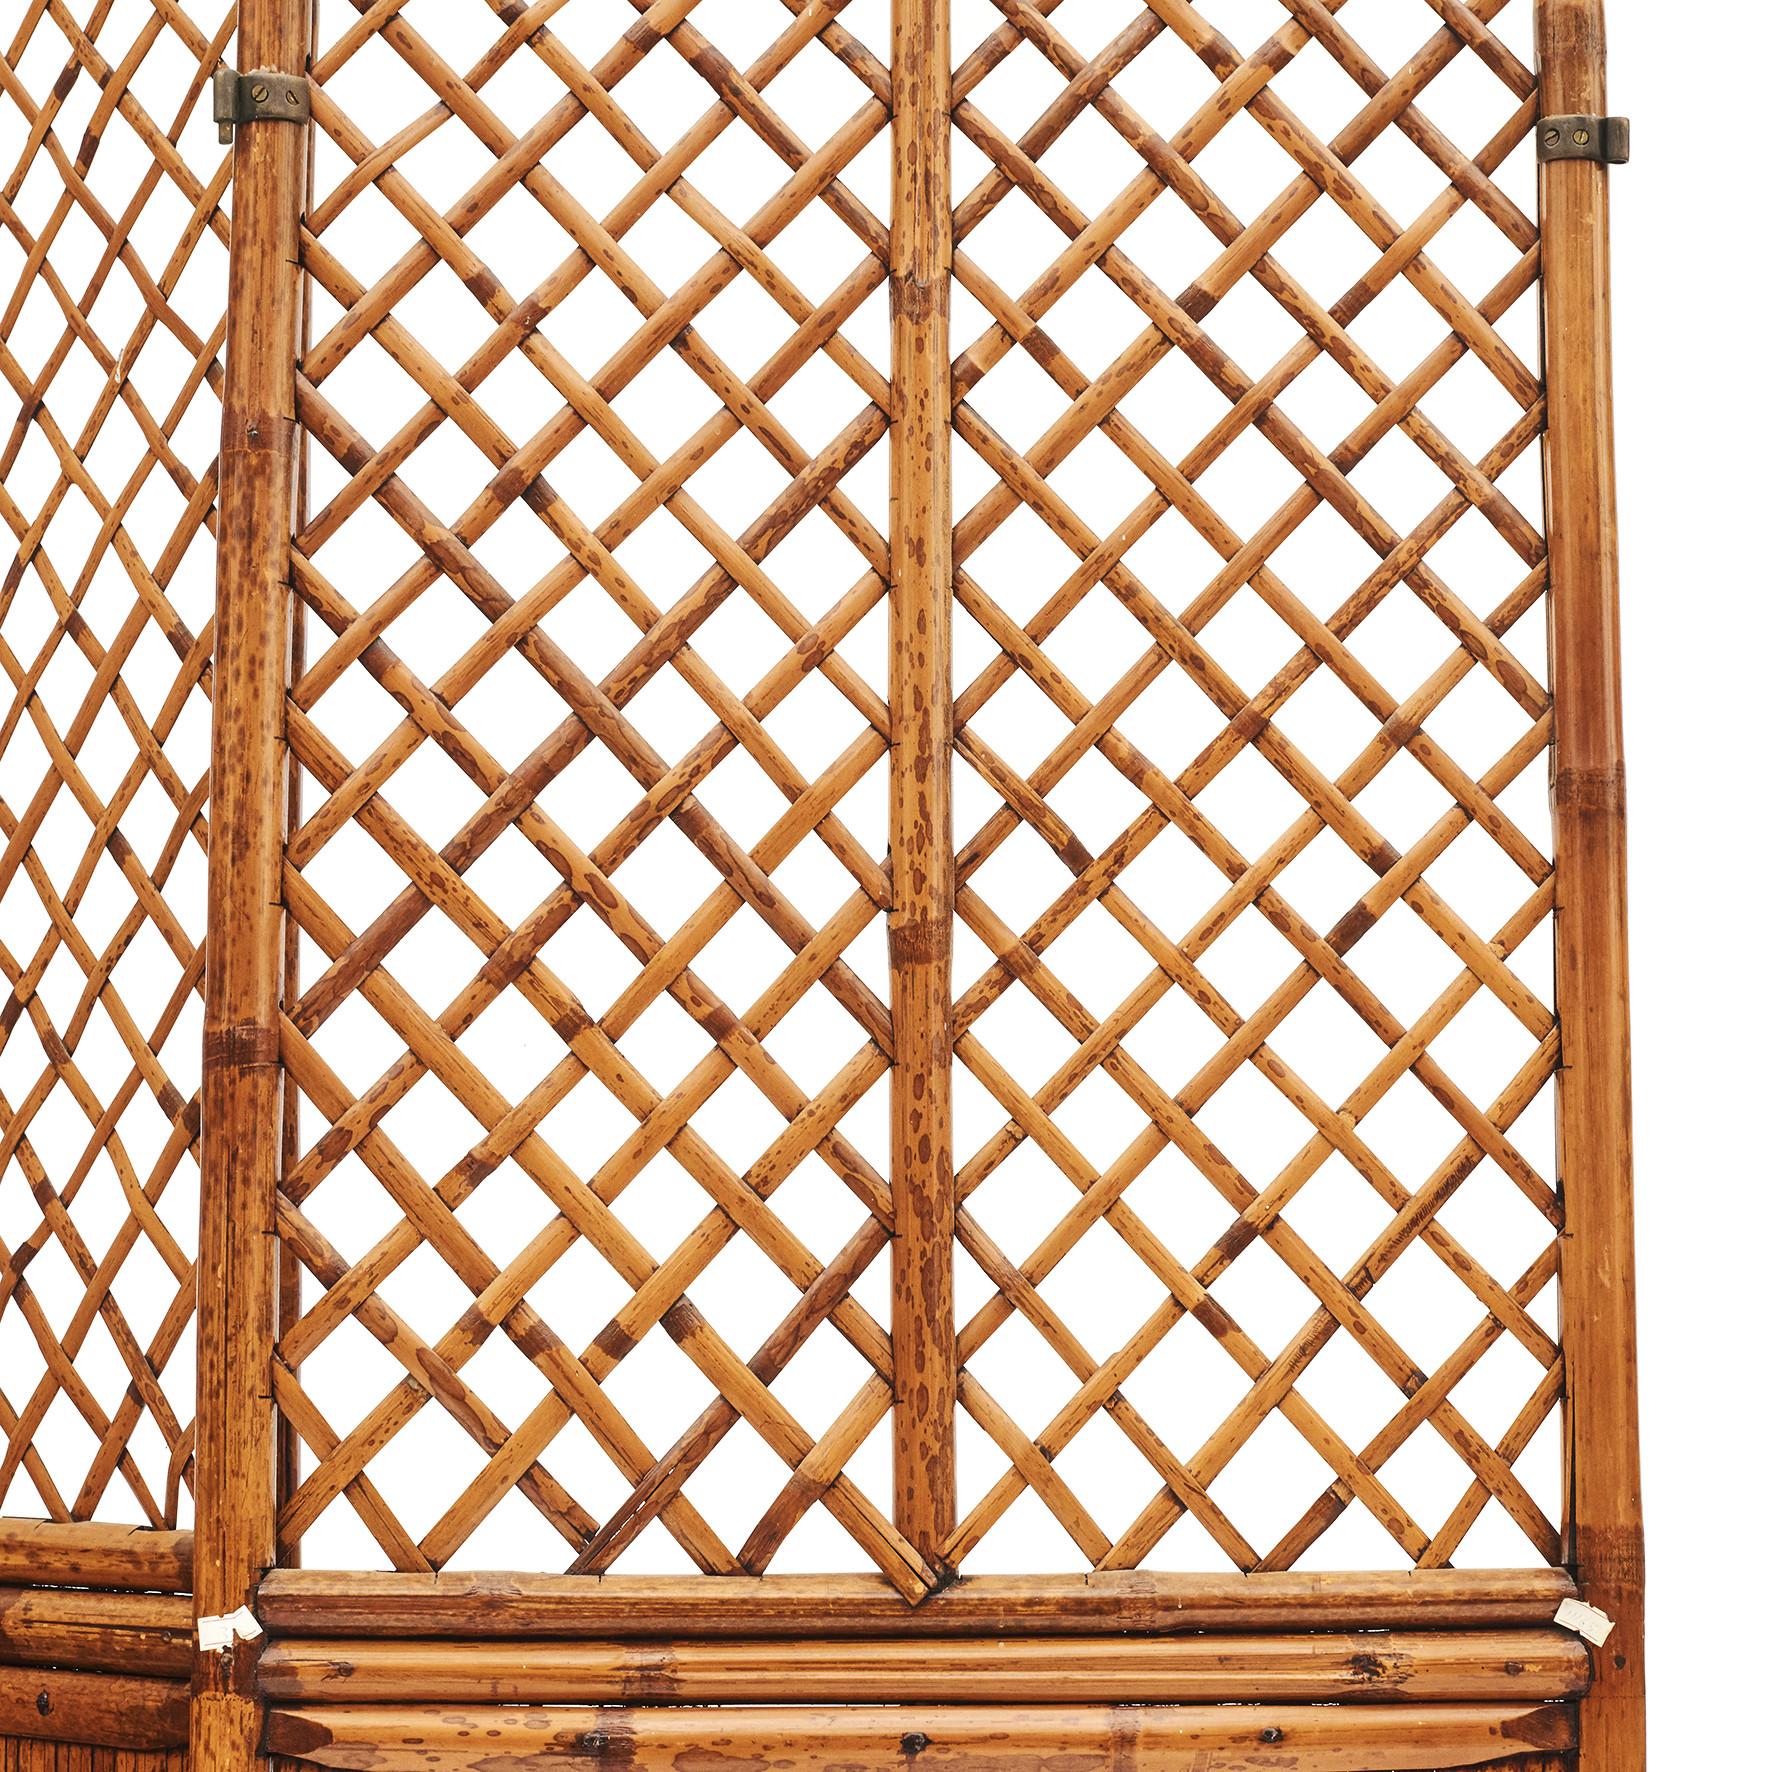 Chinese three-panel lattice screen or room divider (each 245 x 55 x 4 cm.)
Made in bamboo
Original condition with a beautiful naturally aged patina, highlighted by a clear lacquer finish.
China, approx. 1820-1840.